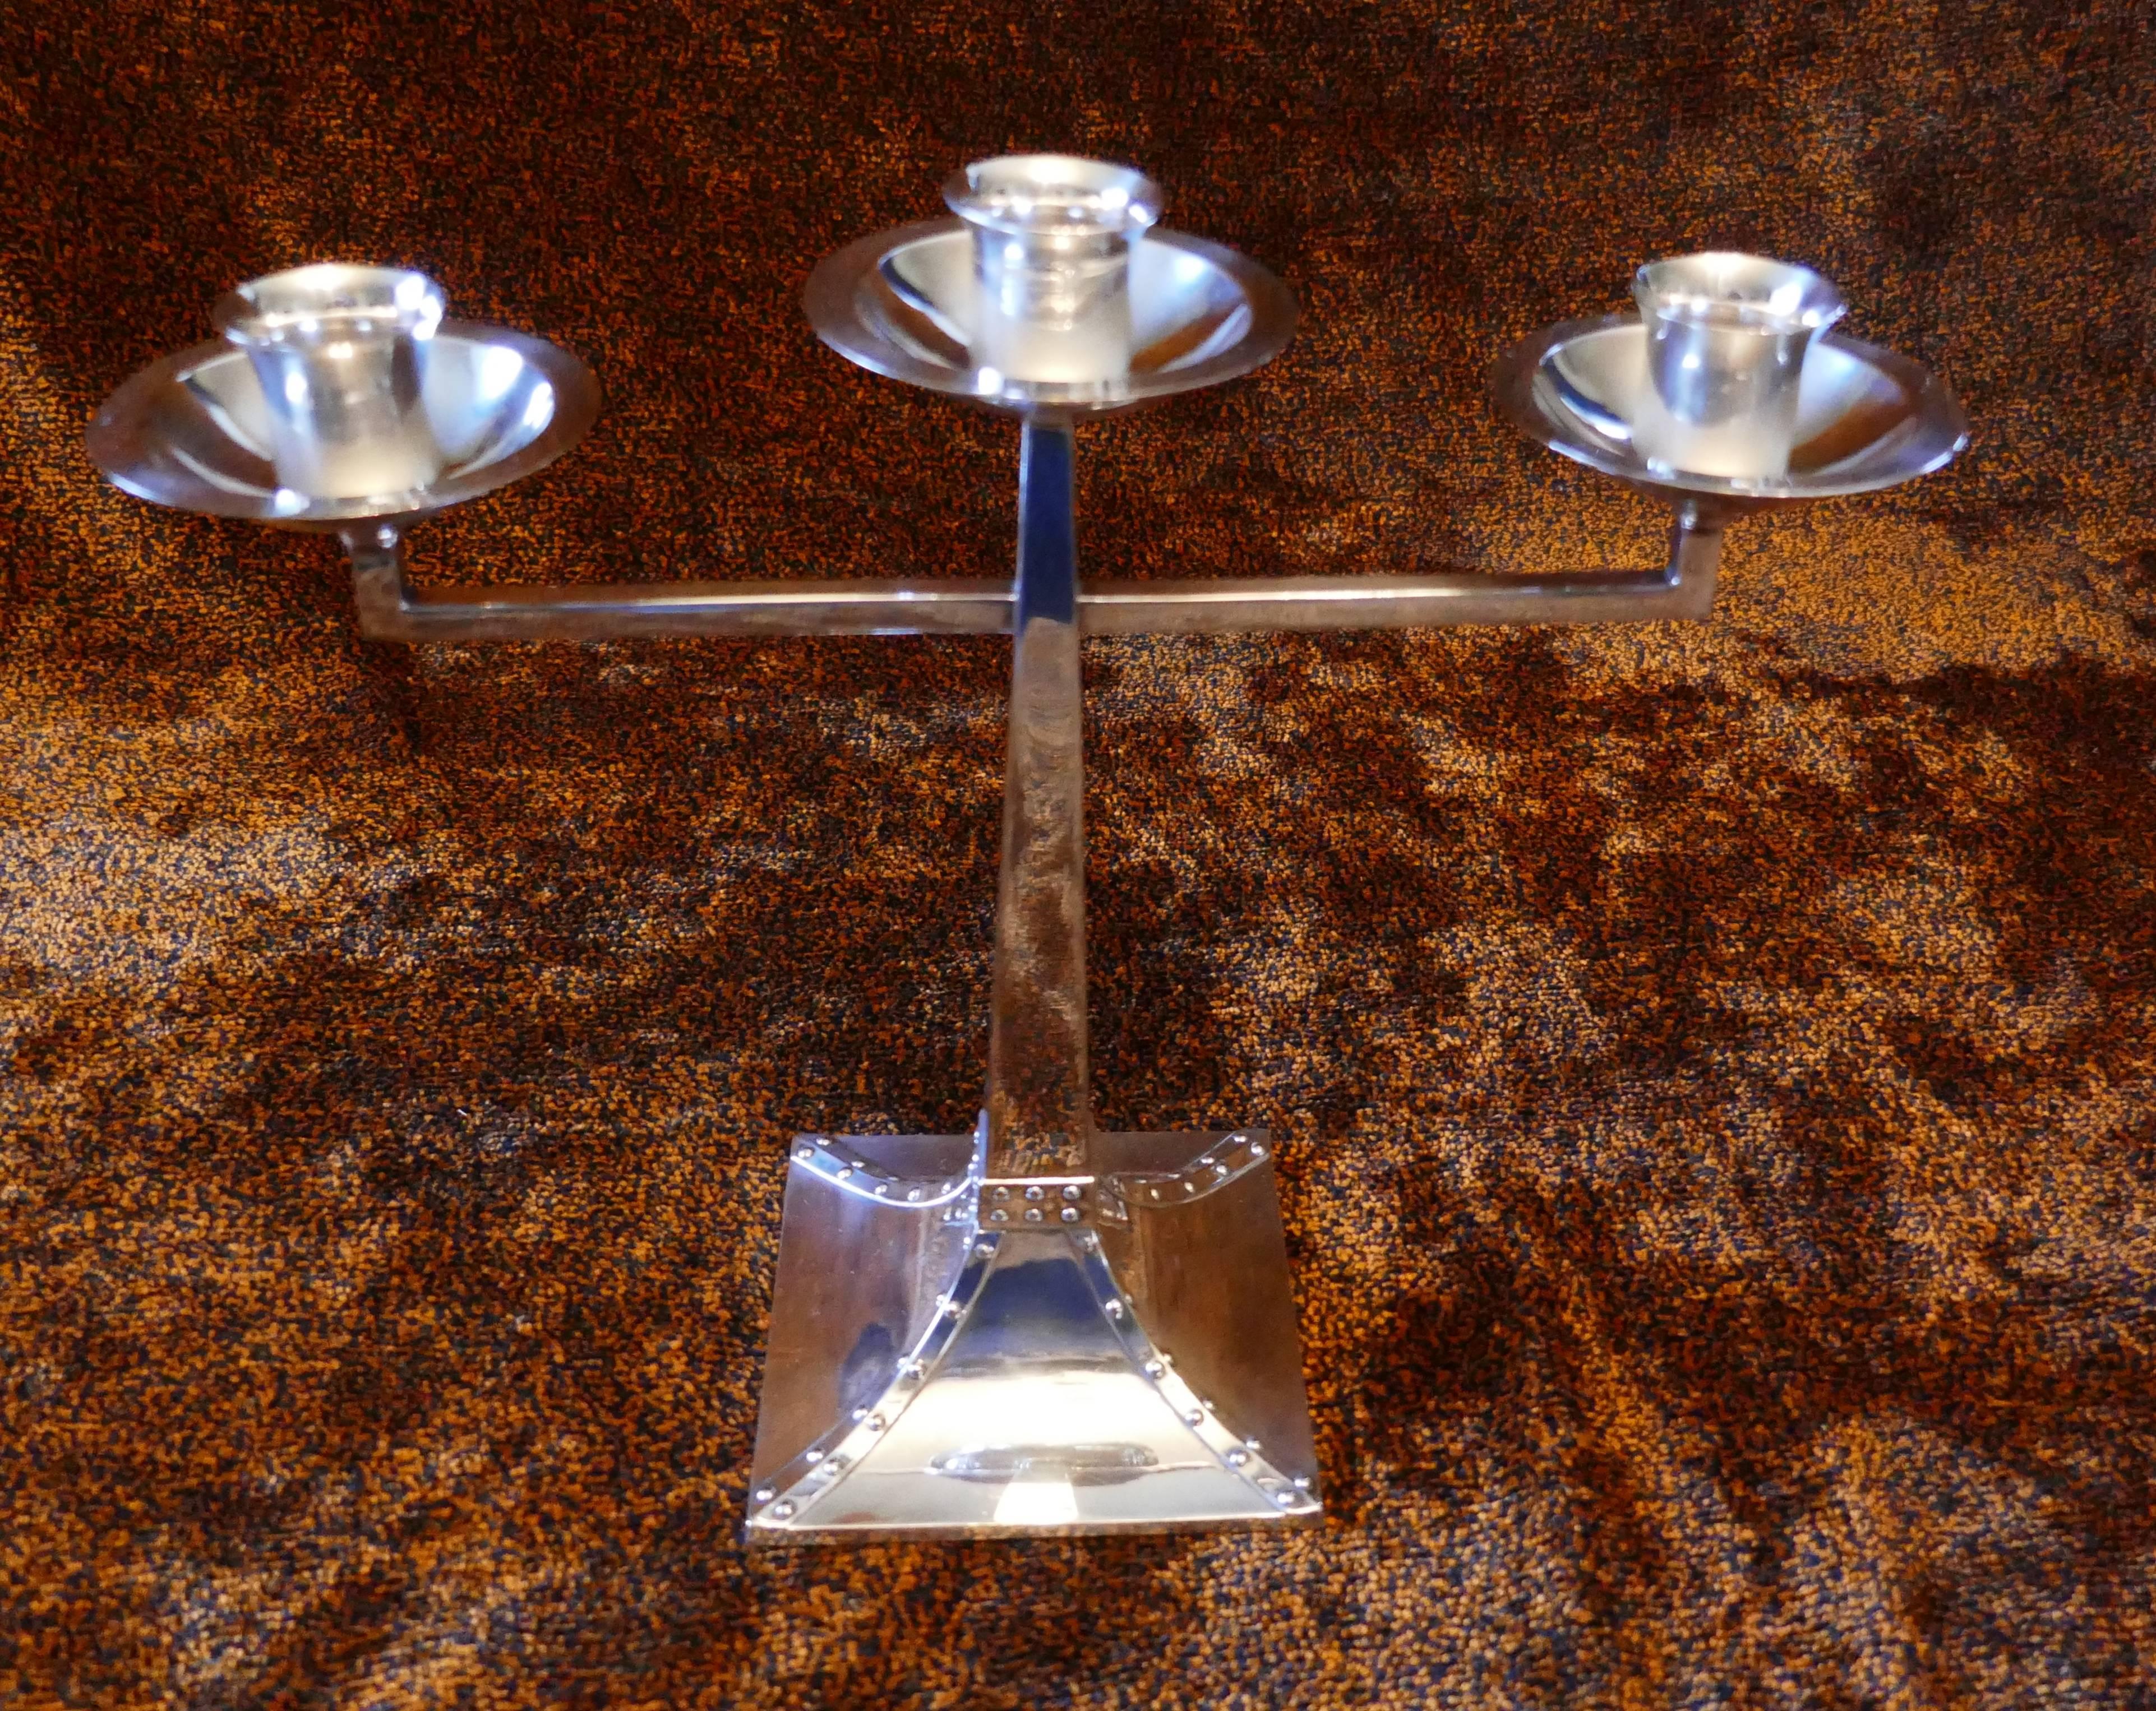 A pair of James Dixon & Sons three-branch silver Arts & Crafts candelabra

This is a magnificent pair of early 20th century table candelabra, each one has three sconce topped branches set on a tapering rectangular stem. The base of the candelabra